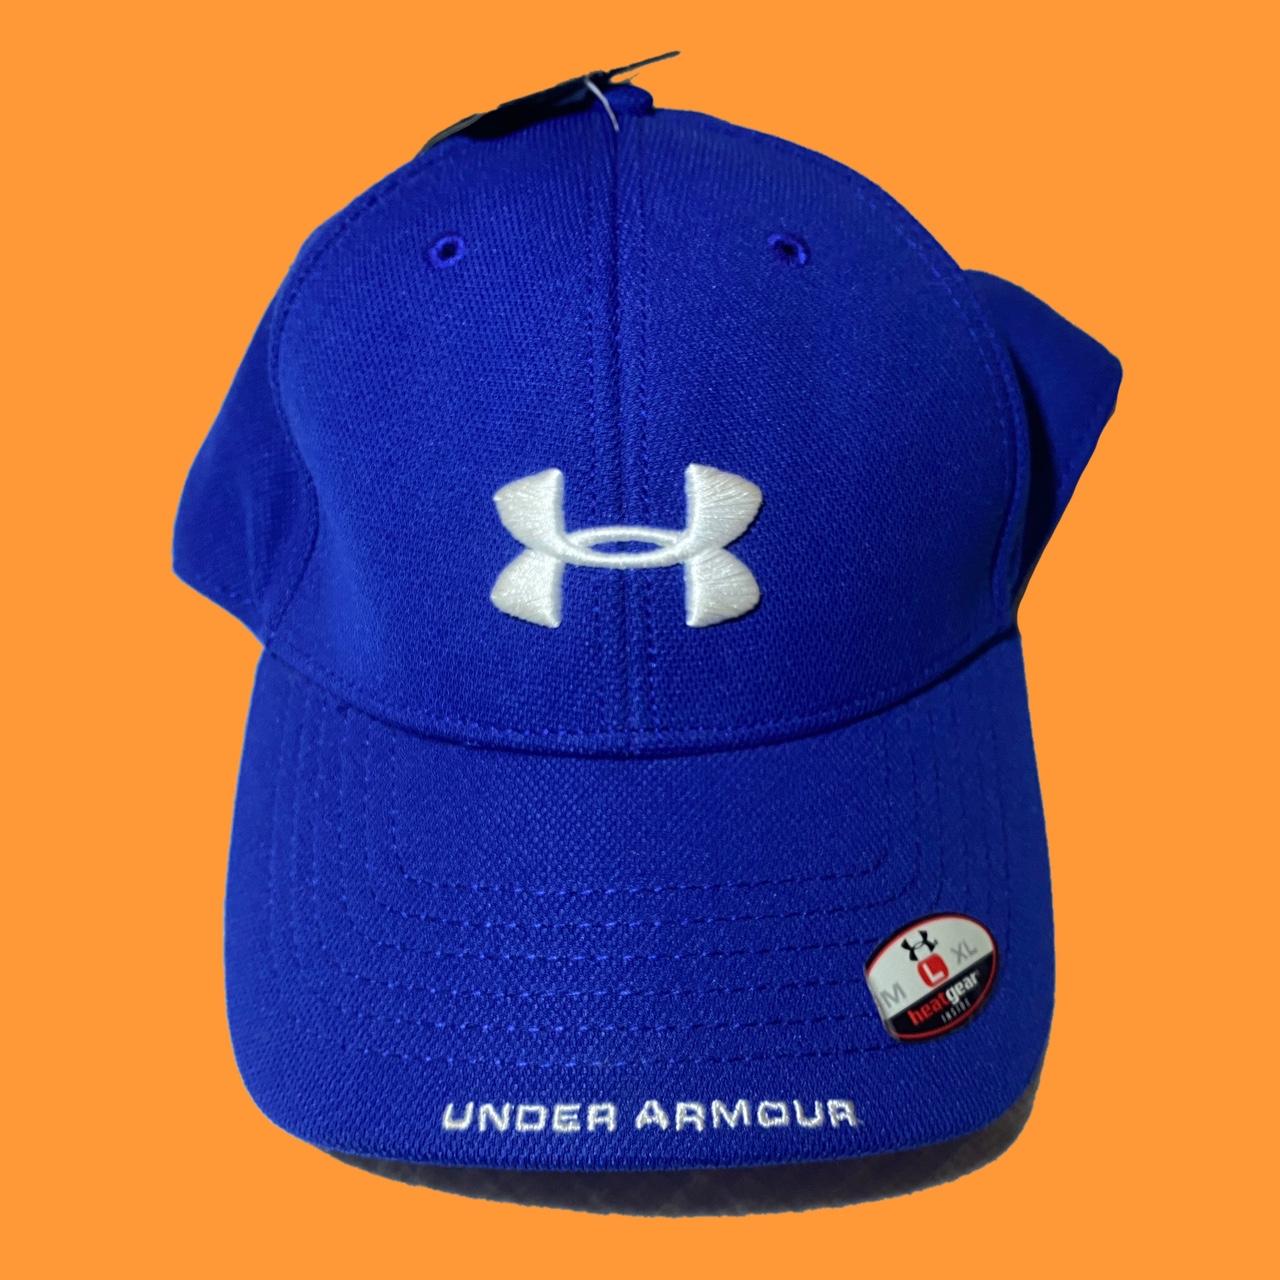 Under Armour cap No stains, brand new $4 shipping - Depop